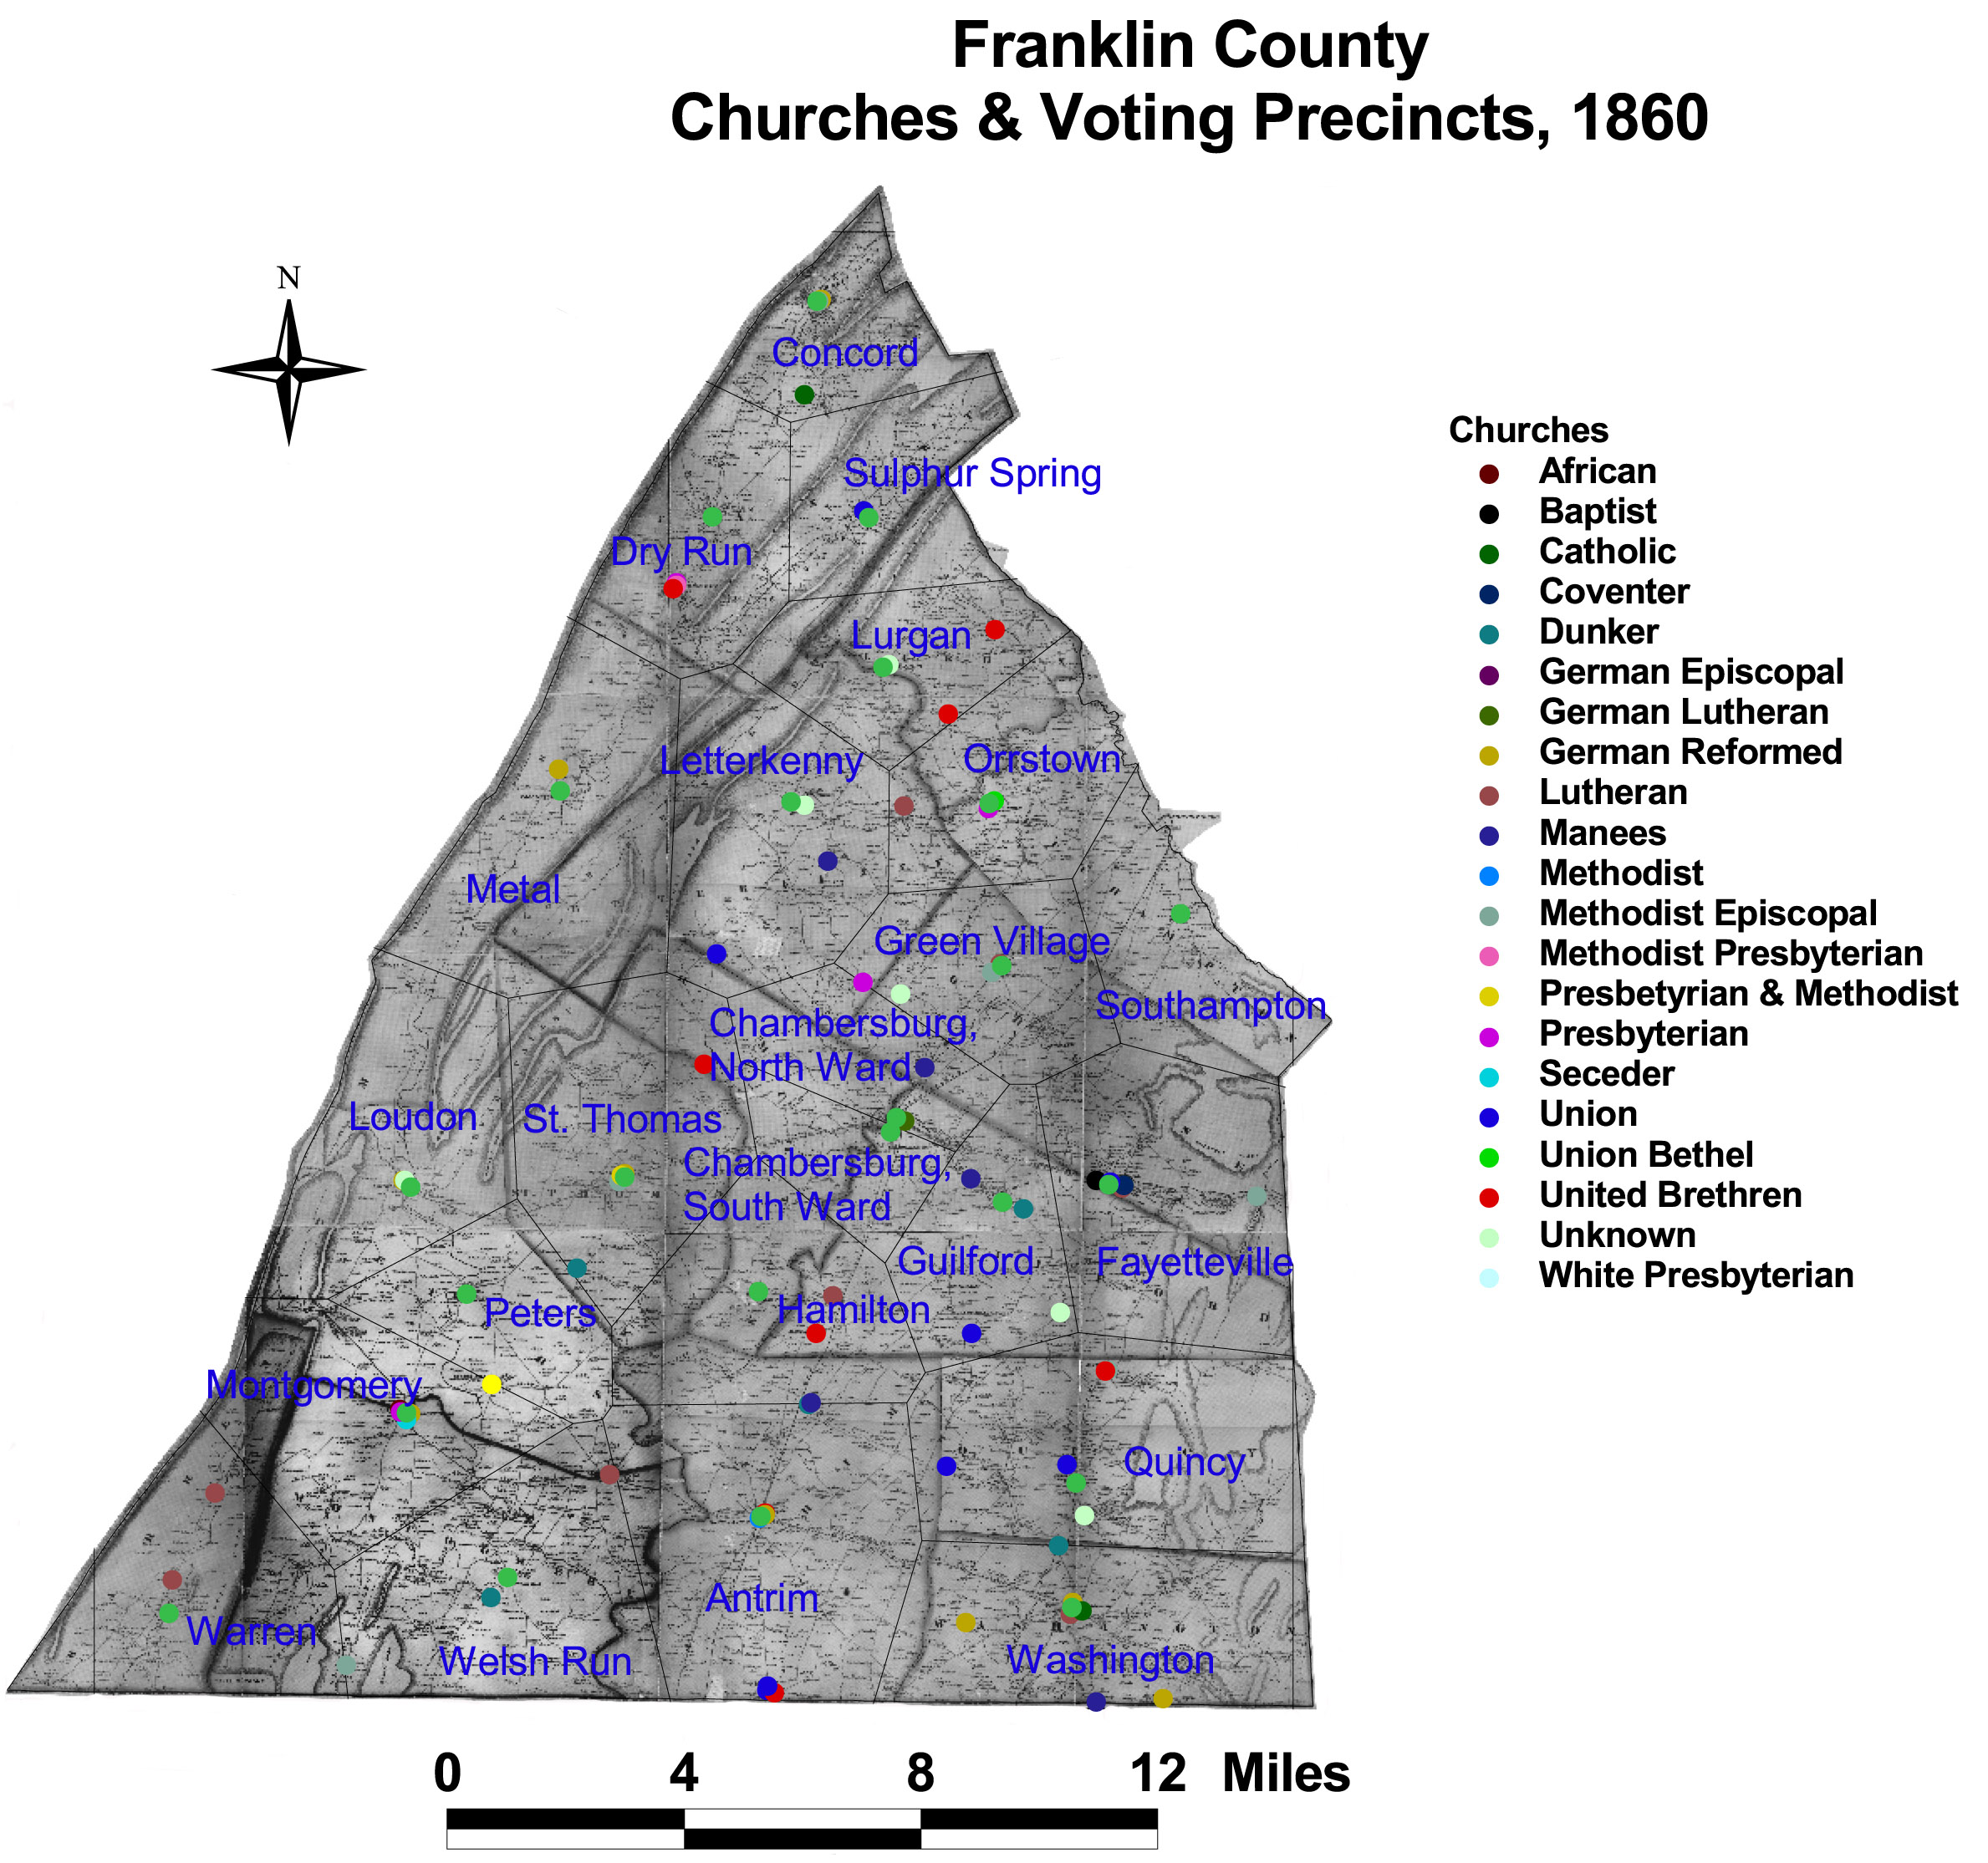 Churches and Voting Precincts, 1860